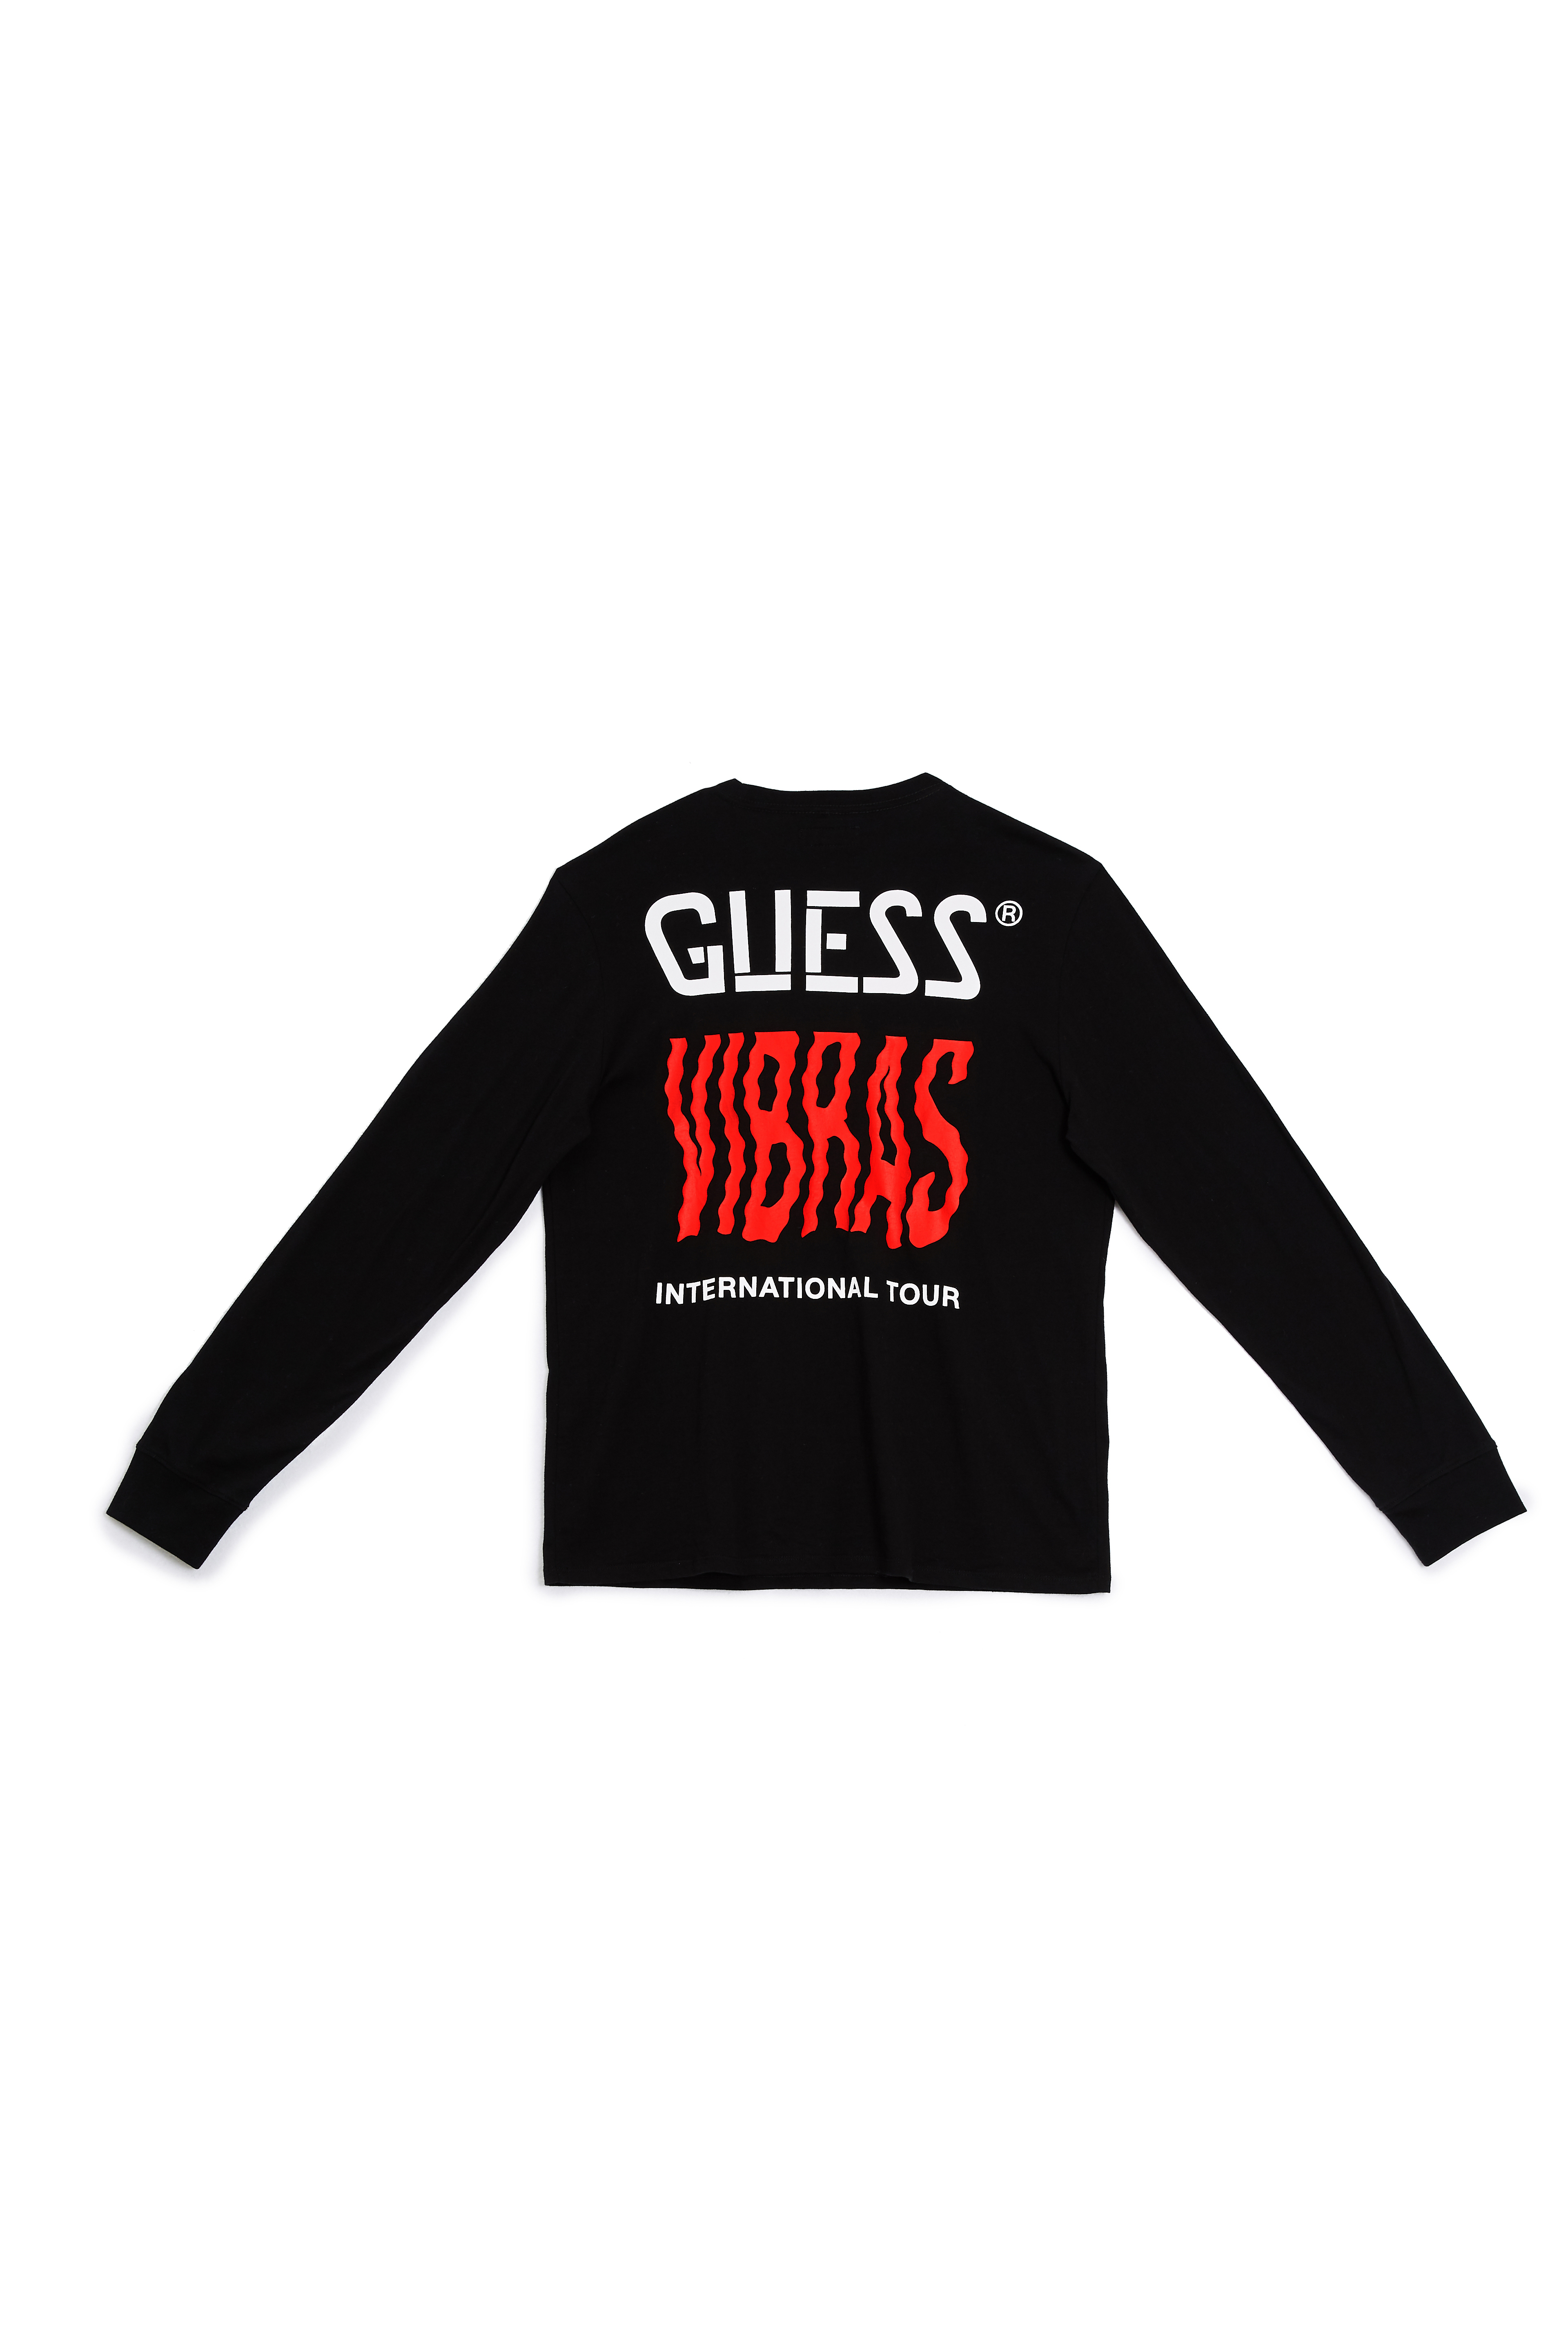 GUESS Partners with J Balvin to Launch Vibras | Wire